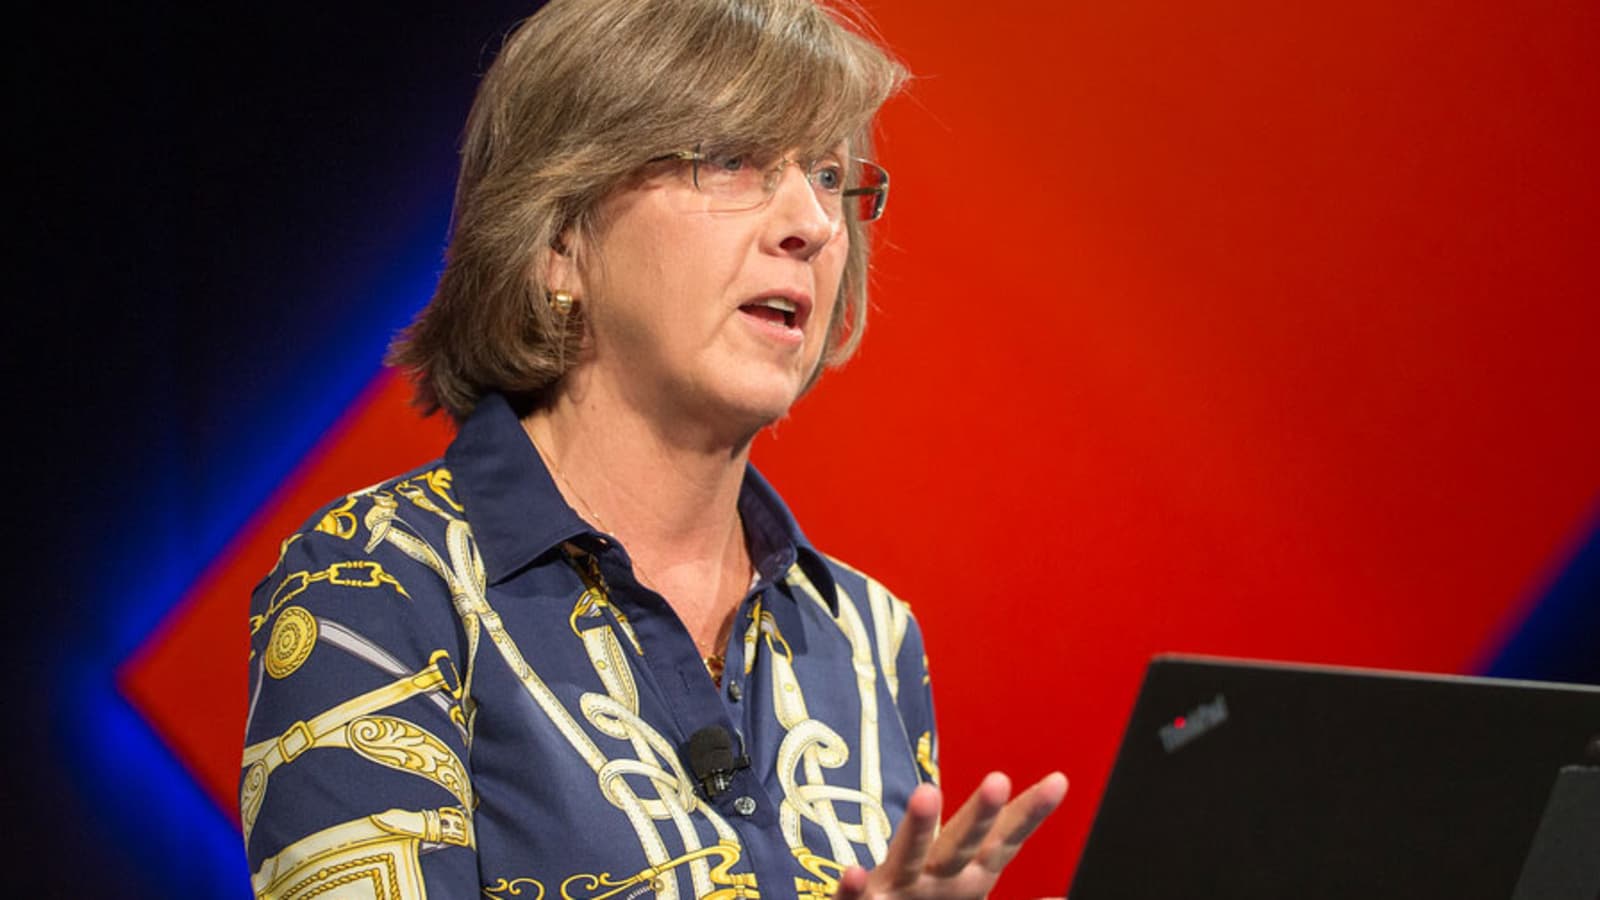 
What Mary Meeker Thinks About Venture Capital: Insights From The Queen of Internet Trends